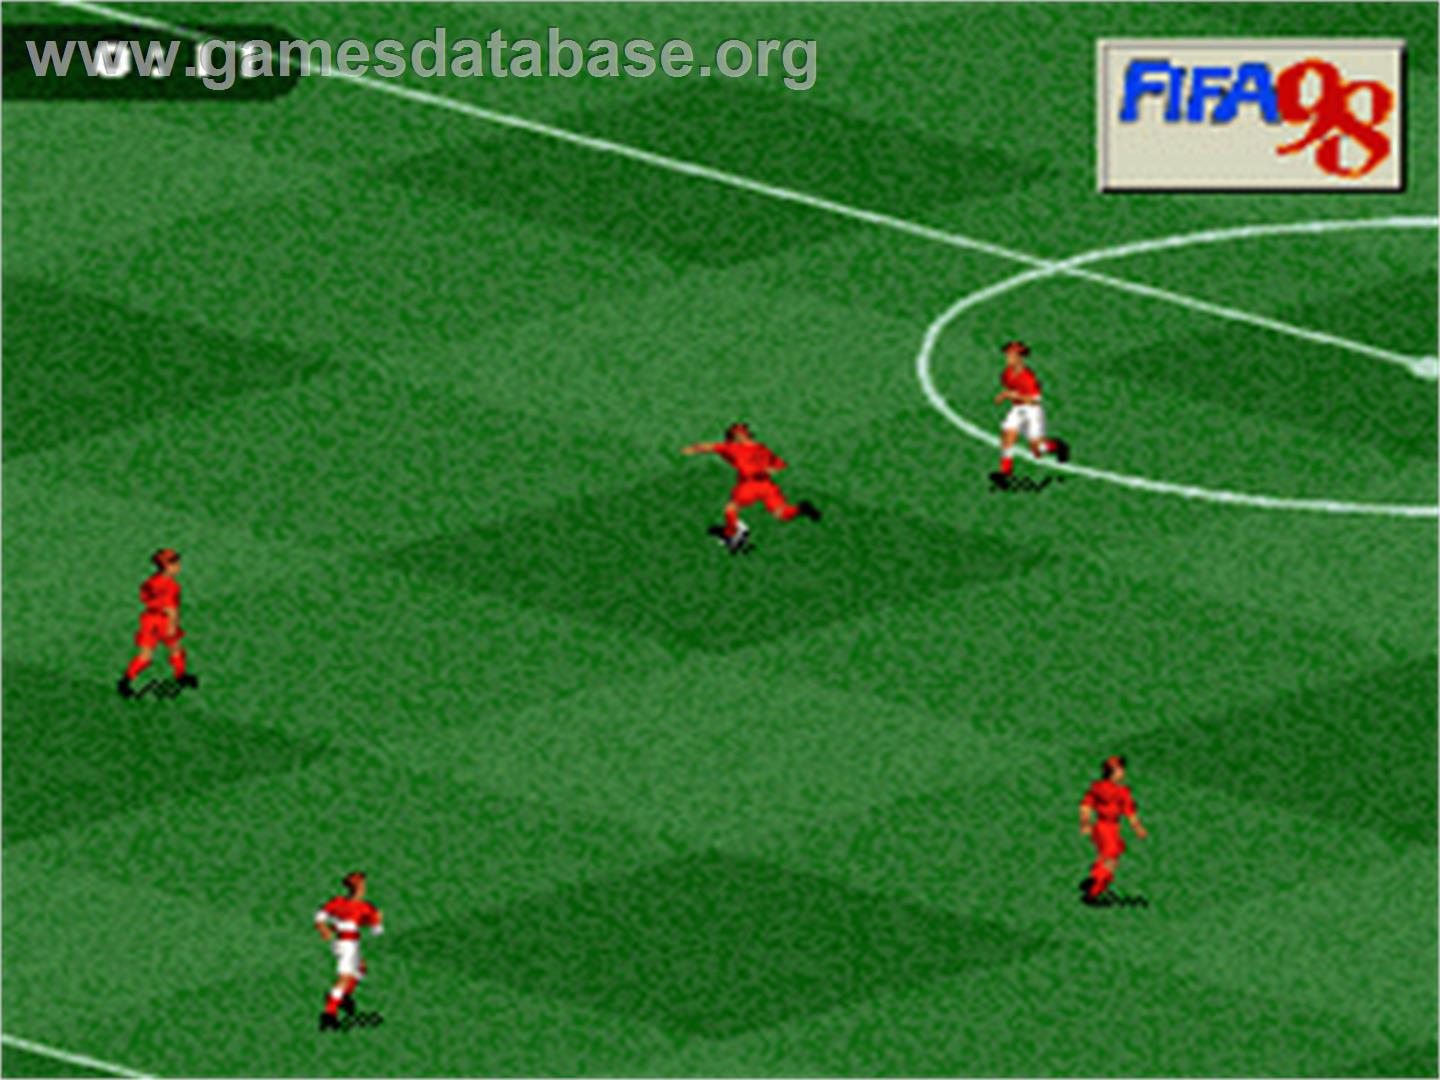 FIFA 98: Road to World Cup - Nintendo SNES - Artwork - In Game